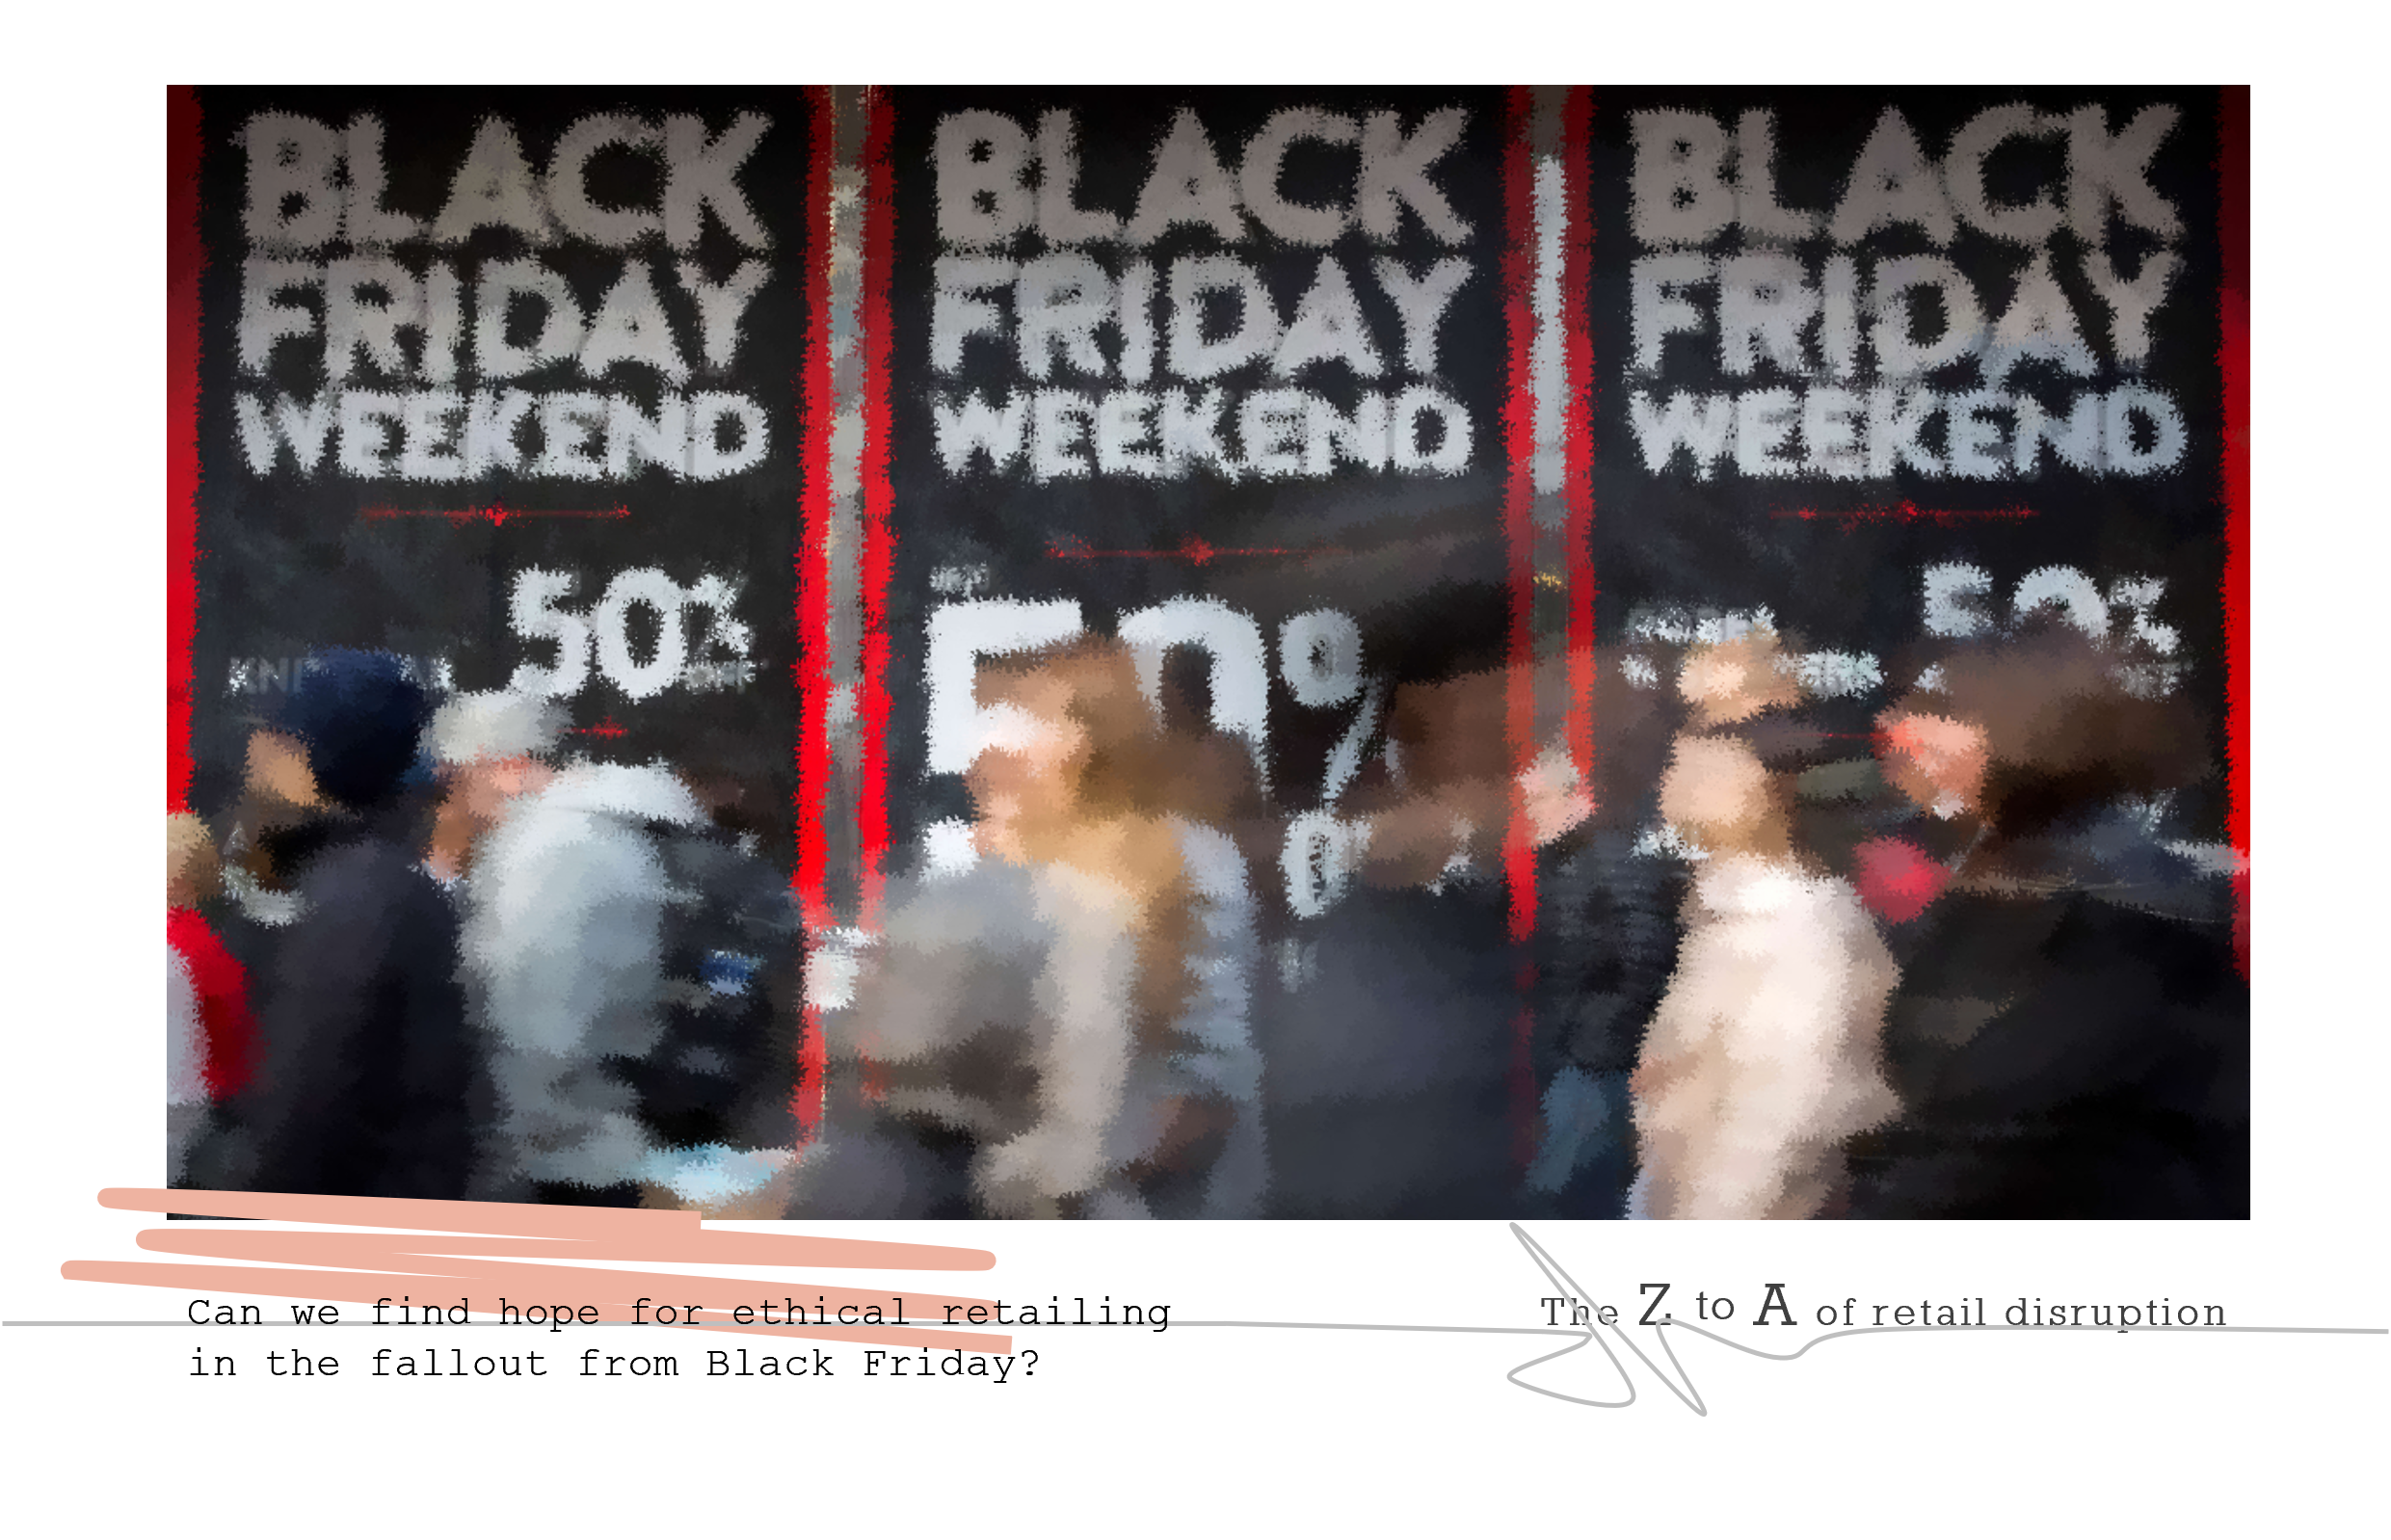 Can we find hope for ethical retailing in the fallout from Black Friday?